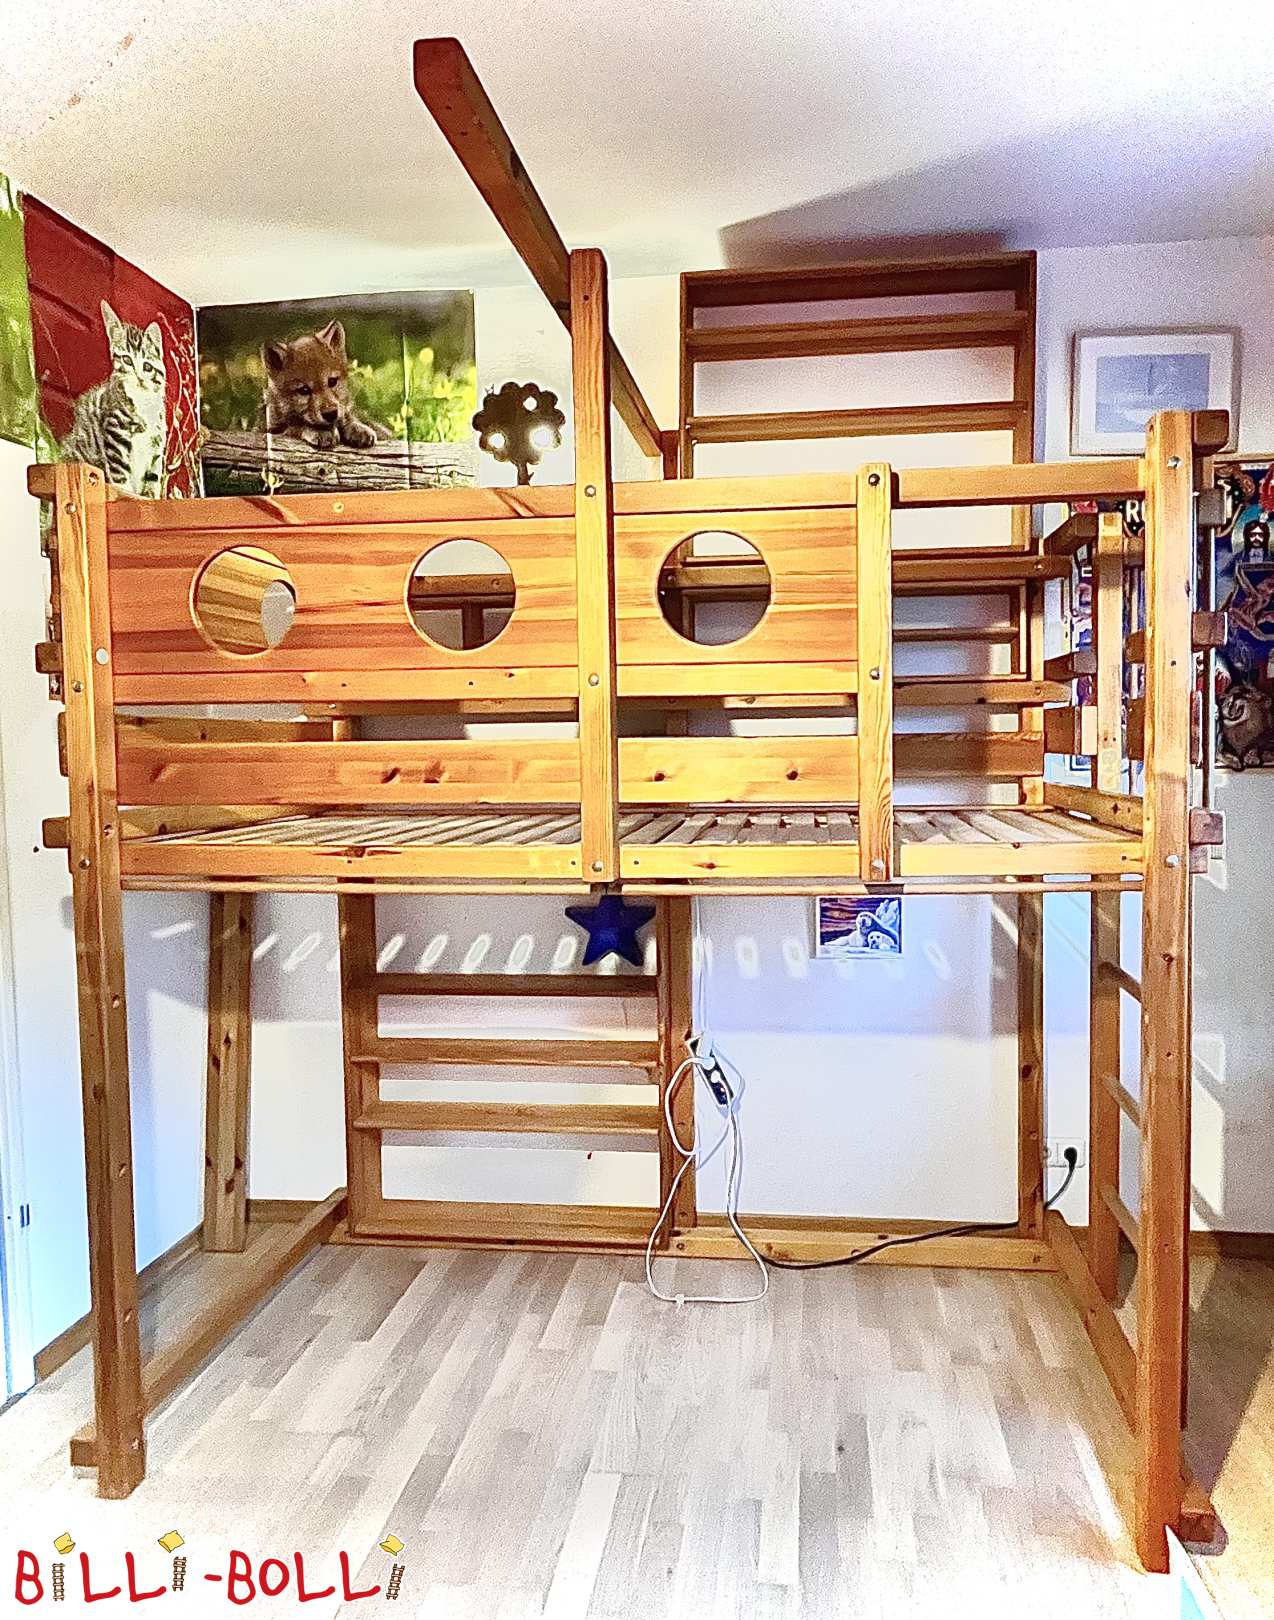 Loft bed oiled in pine that grows with the child (Category: Accessories/extension parts pre-owned)